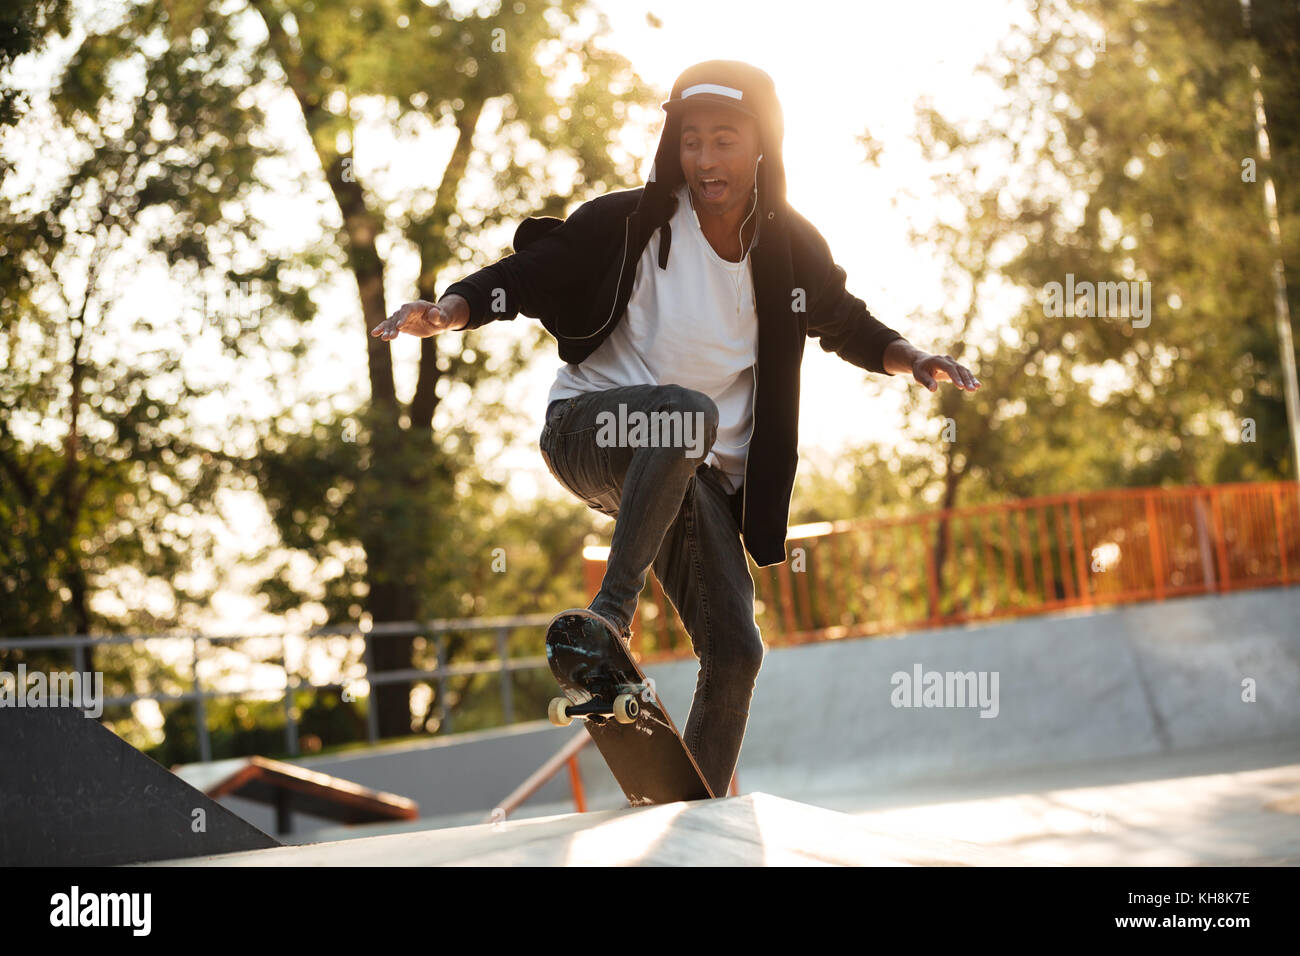 Afro american guy jumping with his skate and performing a trick Stock Photo